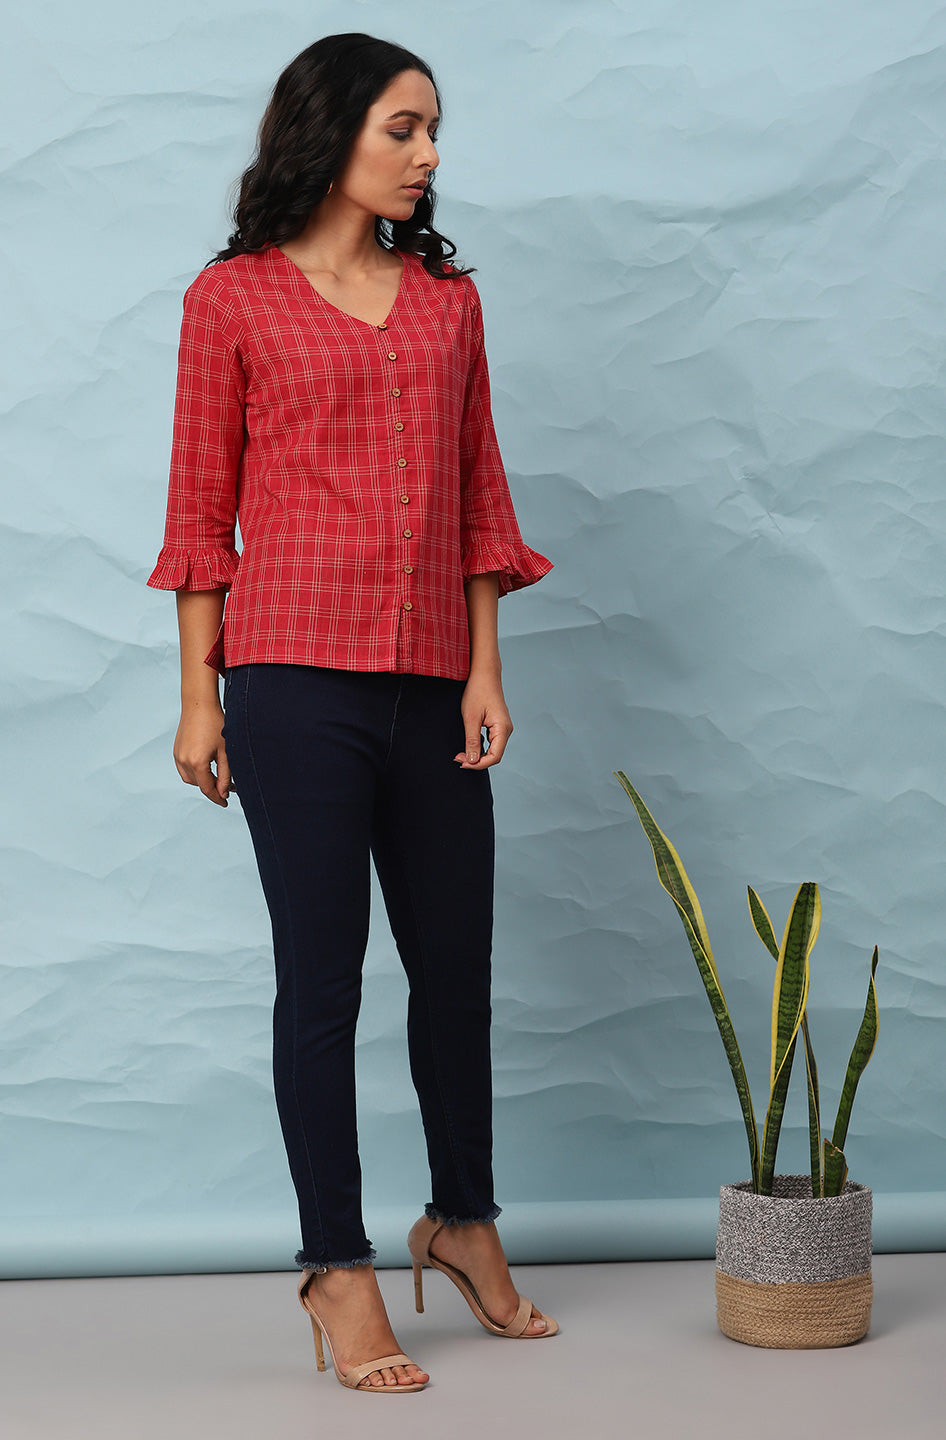 Red Cotton Top